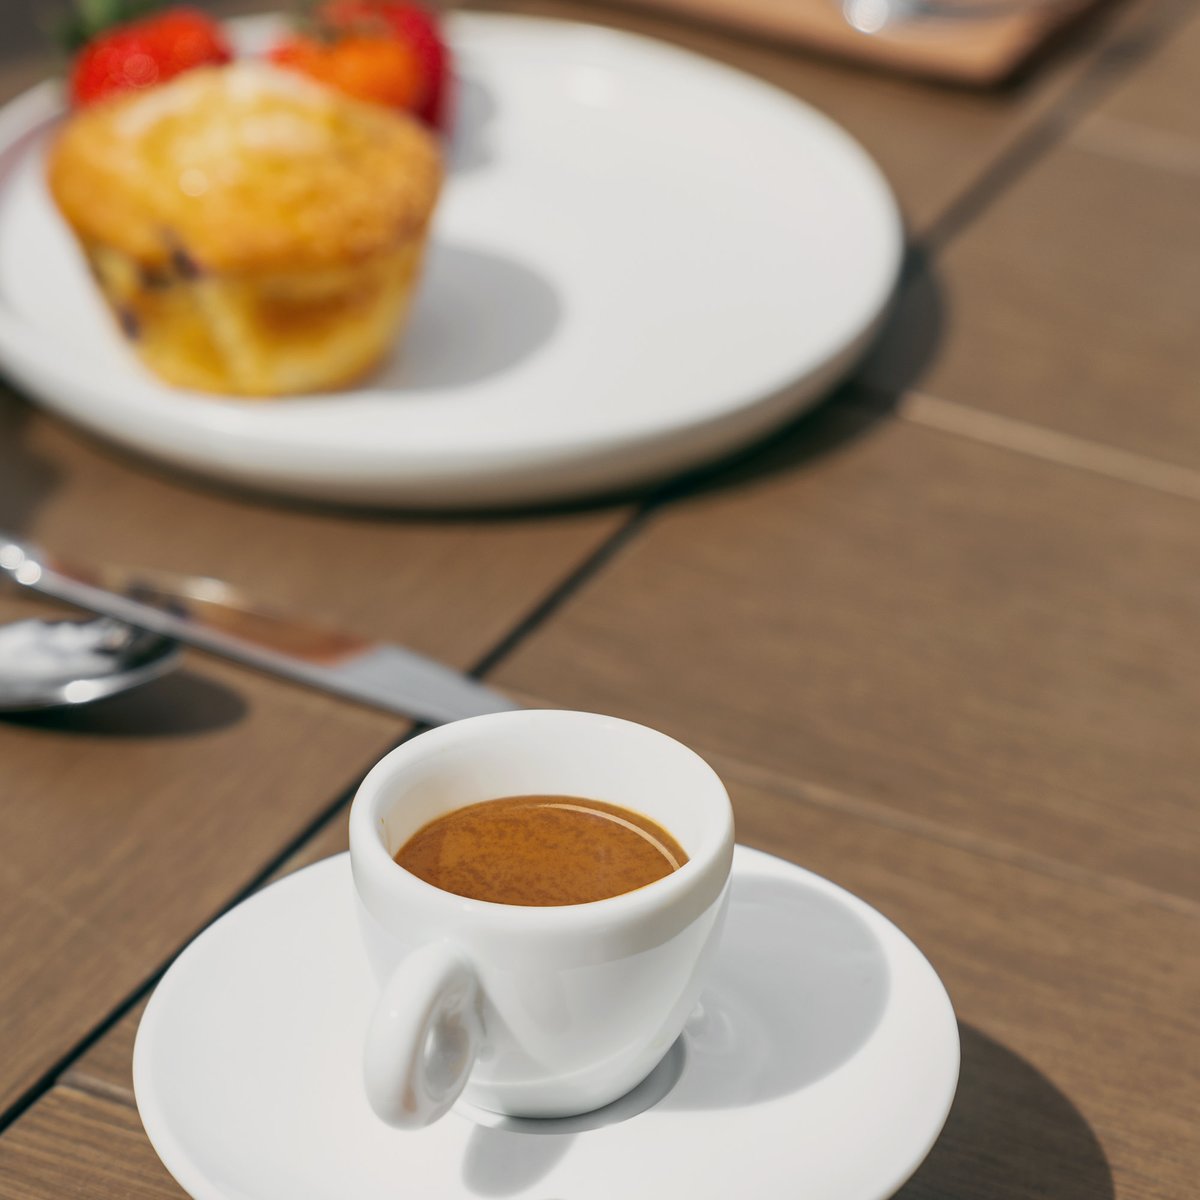 The bold taste of espresso pairs perfectly with every moment and flavor of brunch. What’s your favorite espresso companion? #LIVEHAPPilly #QualityLovesDetails #illy #Brunch #Espresso #EspressoPairing